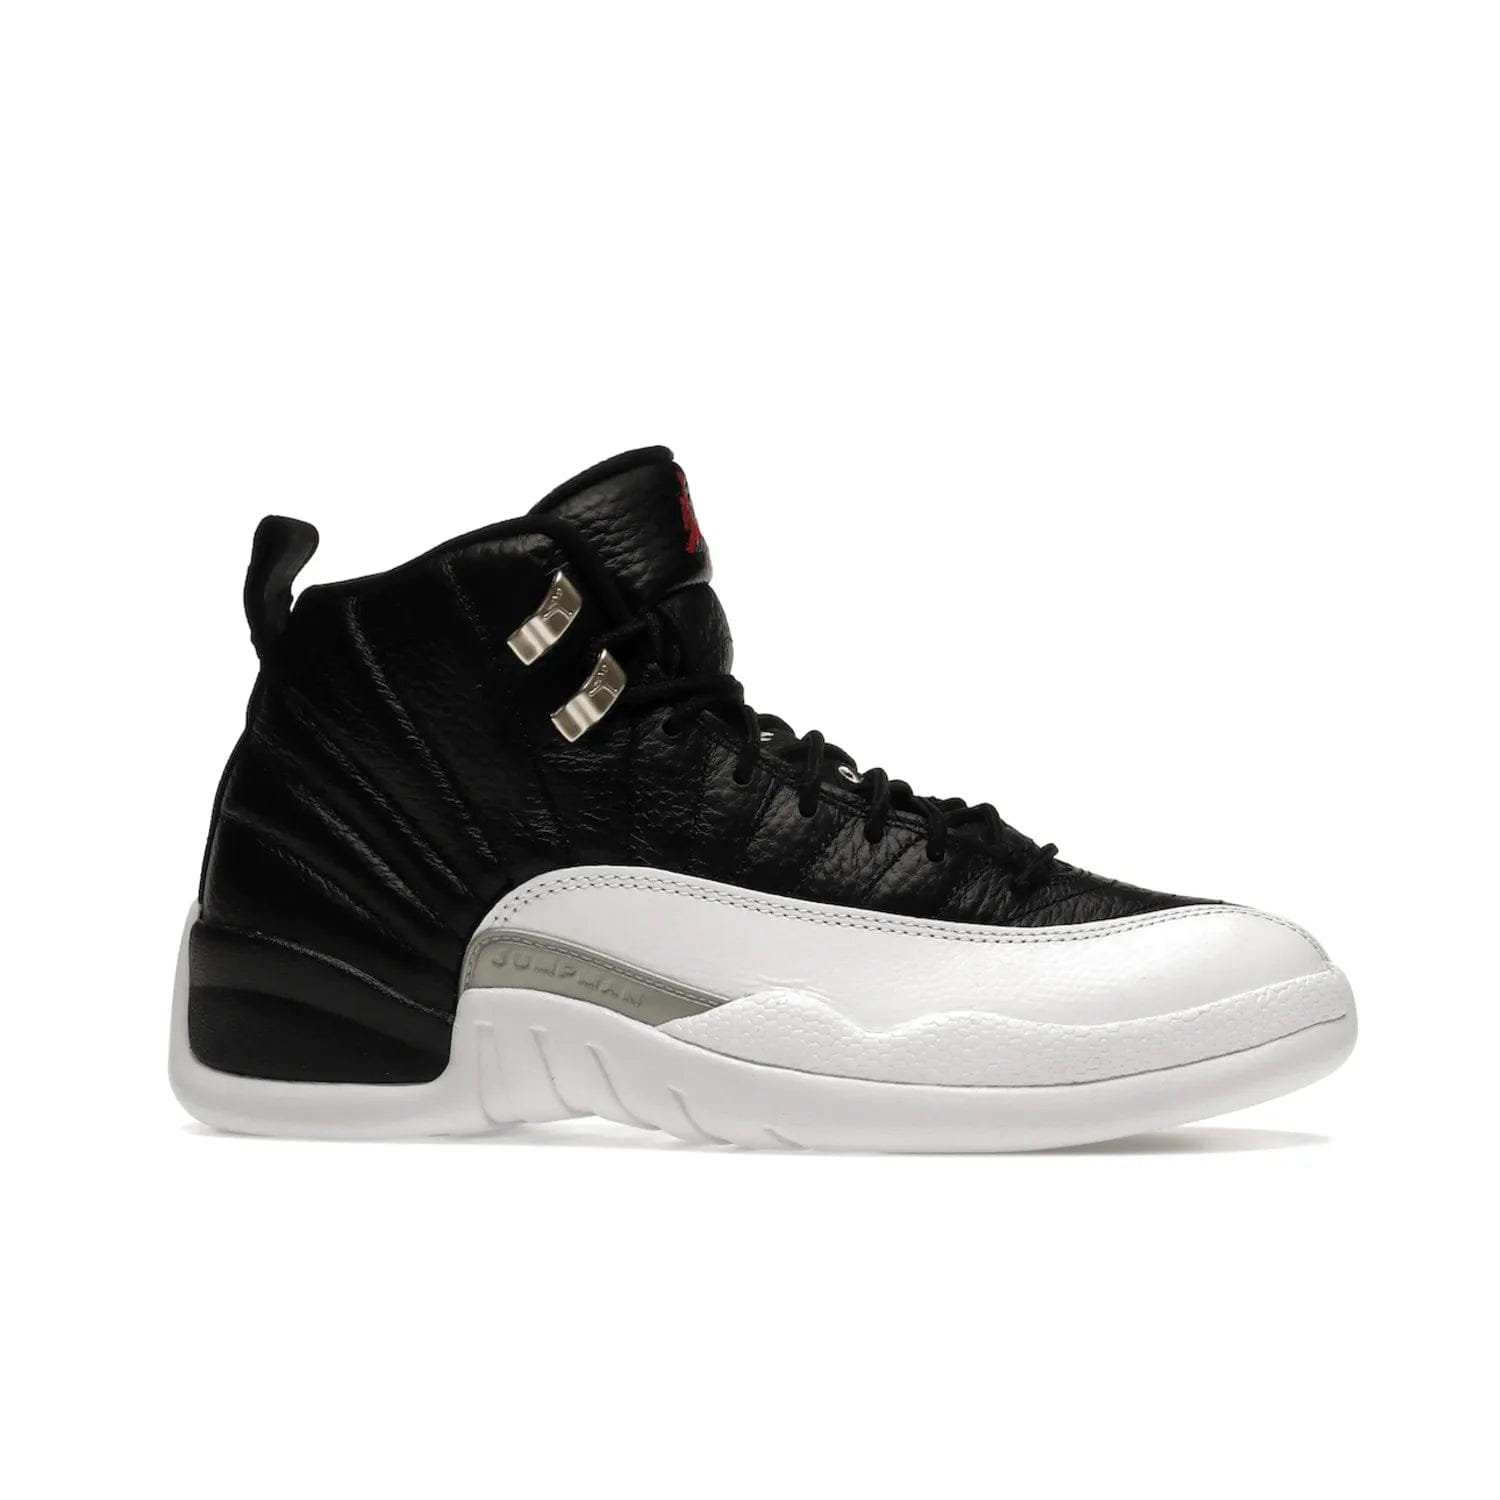 Jordan 12 Retro Playoffs (2022) - Image 2 - Only at www.BallersClubKickz.com - Retro Air Jordan 12 Playoffs. Celebrate 25 years with MJ's iconic shoe. Black tumbled leather upper, white sole with carbon fiber detailing and Jumpman embroidery. Must-have for any Jordan shoe fan. Releases March 2022.